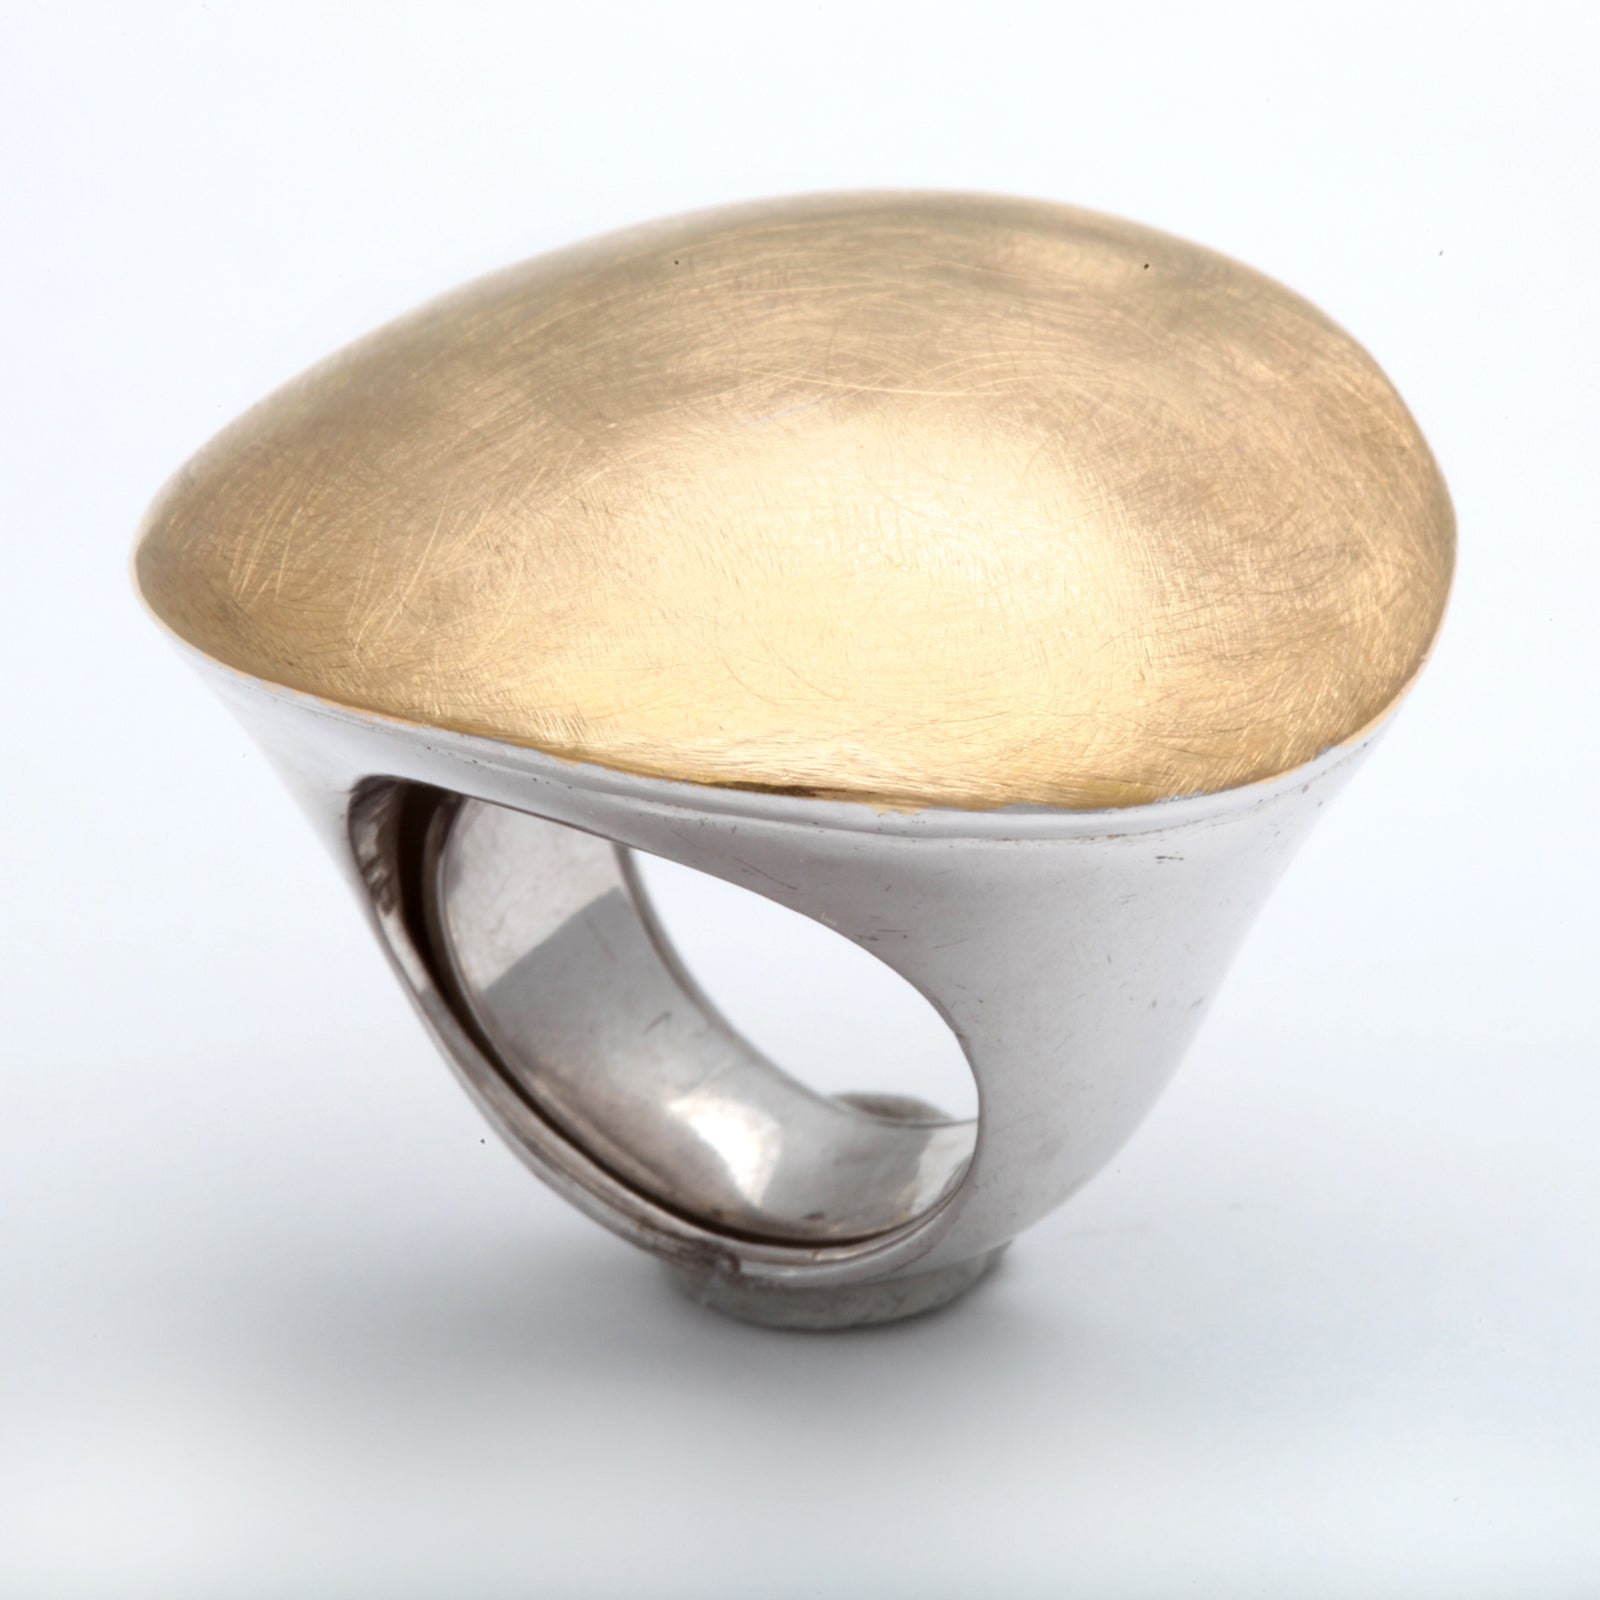 Pitti & Sisi bold ring crafted in sterling silver and gold.  Very fashionable!